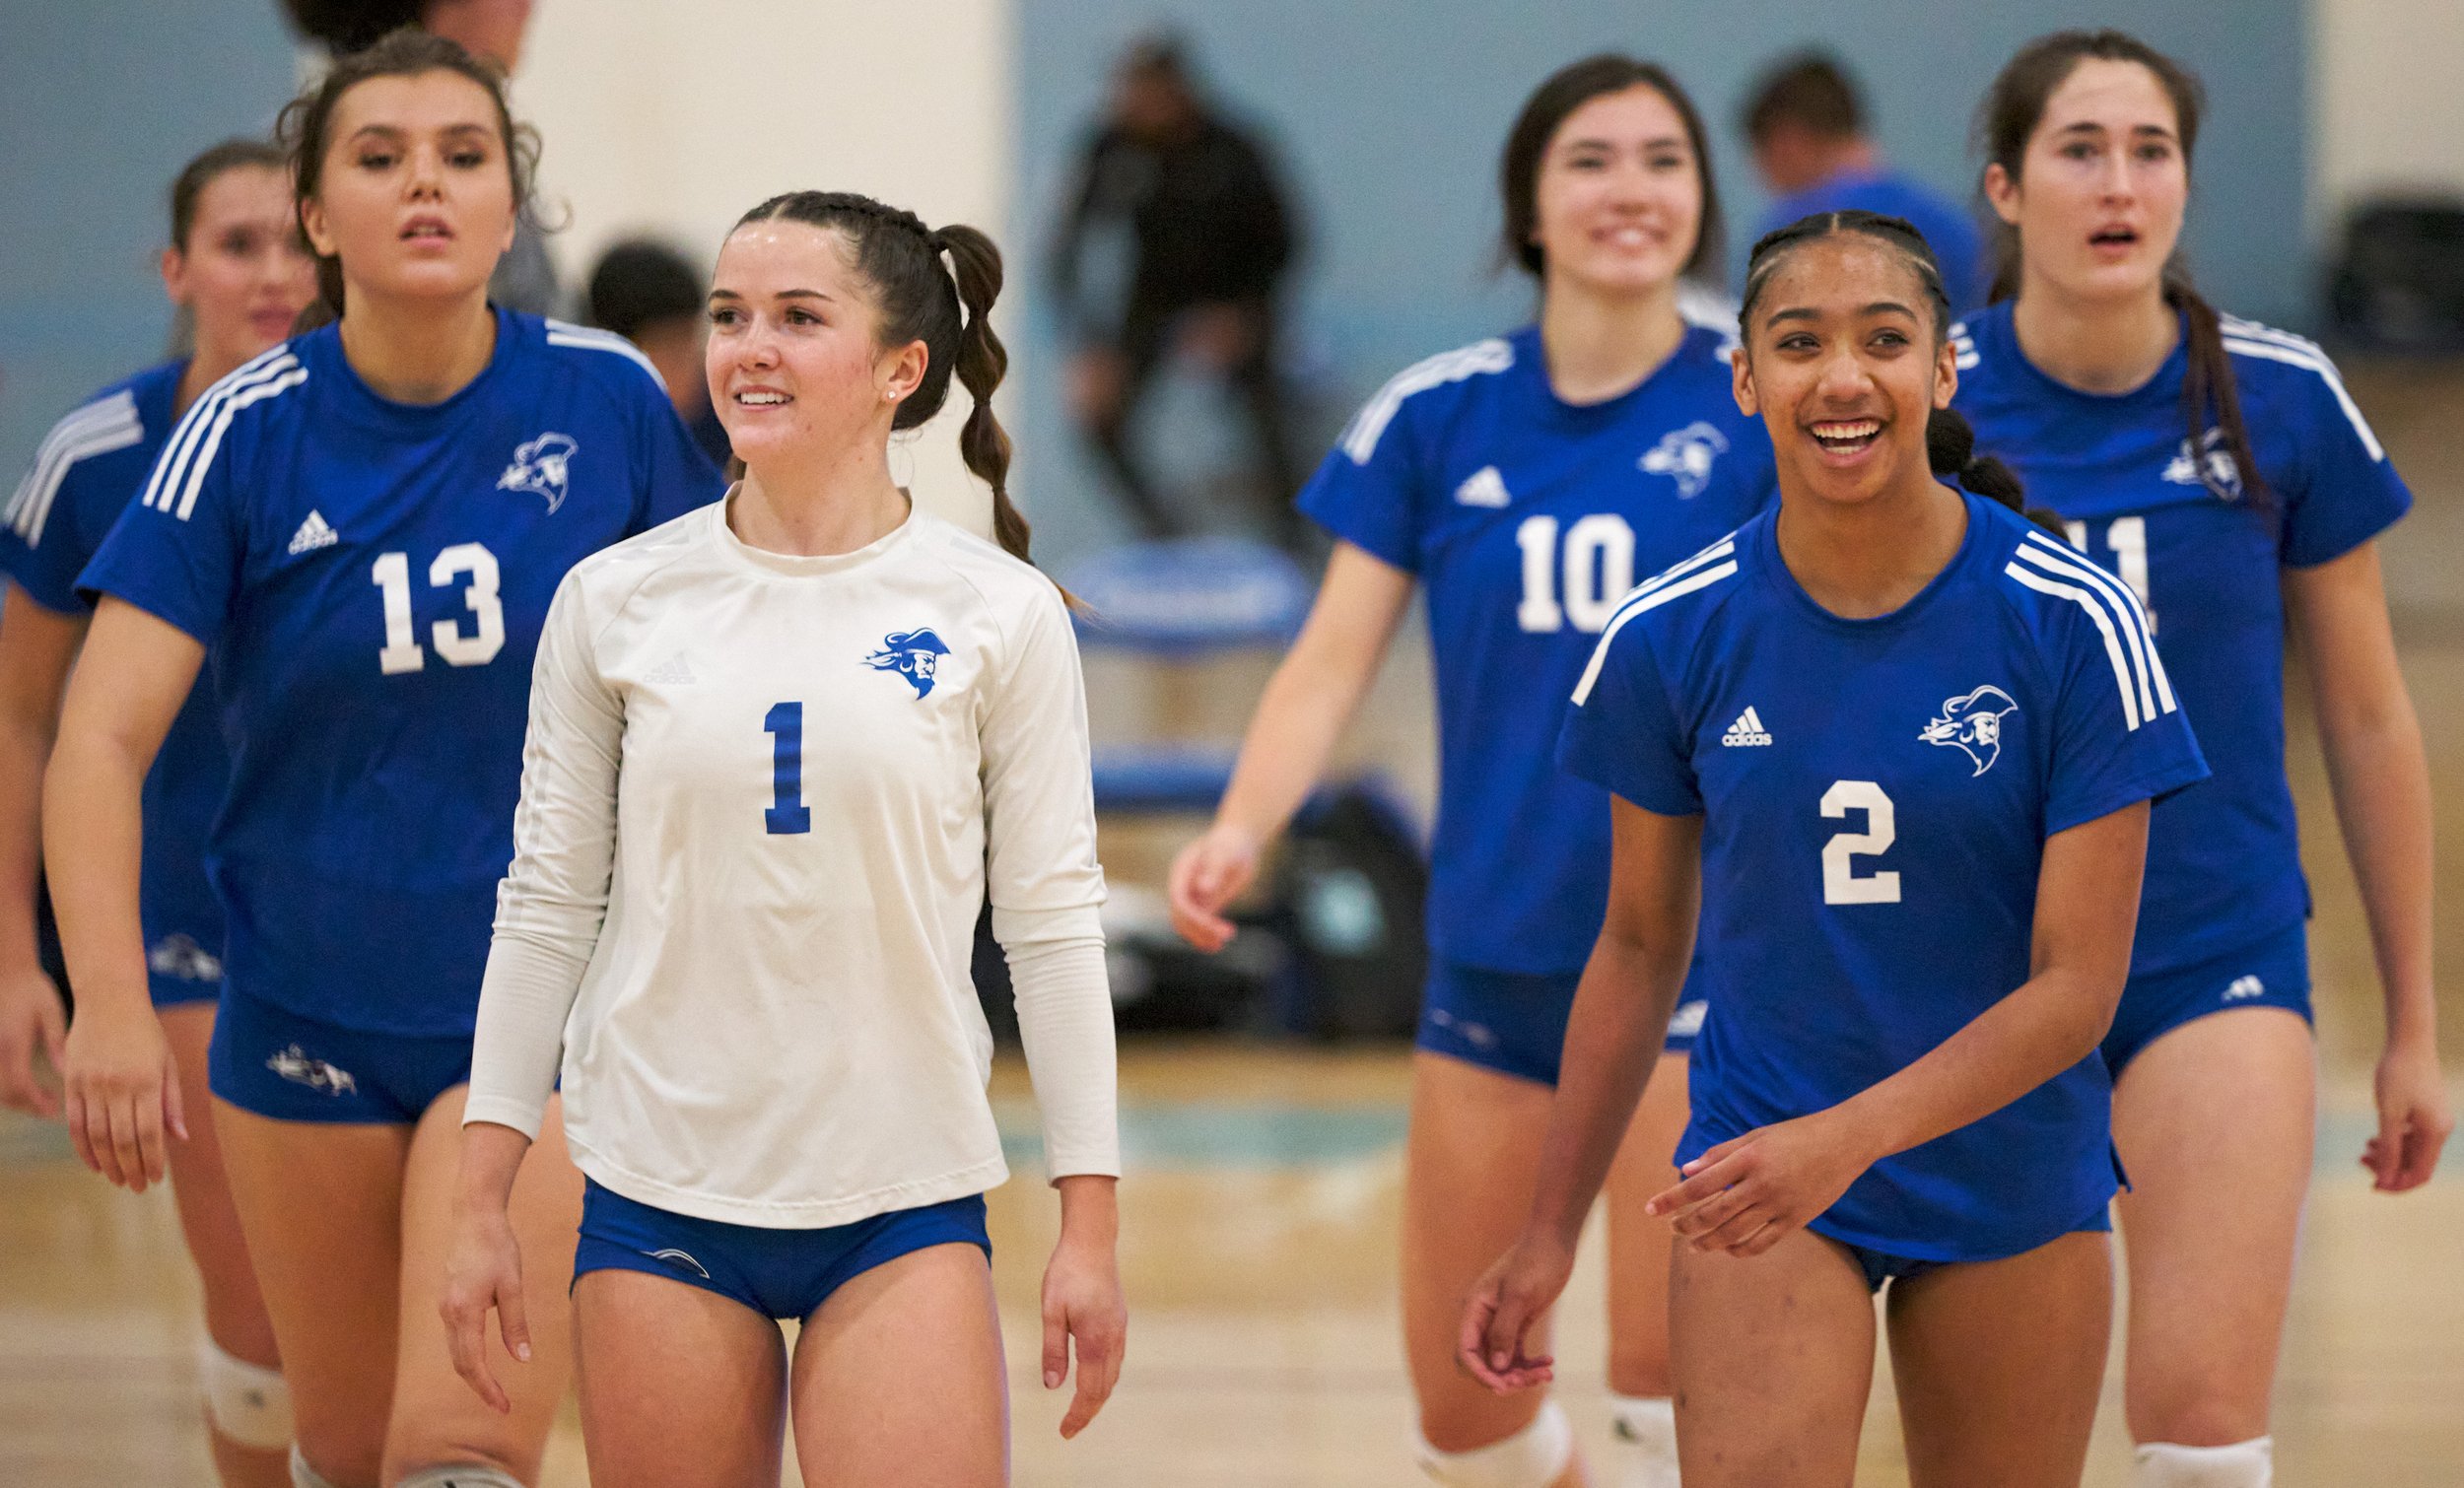  Santa Monica College Corsairs' (L-R) Mia Paulson, Mackenzie Wolff, Halle Anderson, Sophia Odle, Amaya Bernardo, and Maiella Riva during the women's volleyball match against the College of the Canyons Cougars on Friday, Oct. 28, 2022, at SMC Gym in S